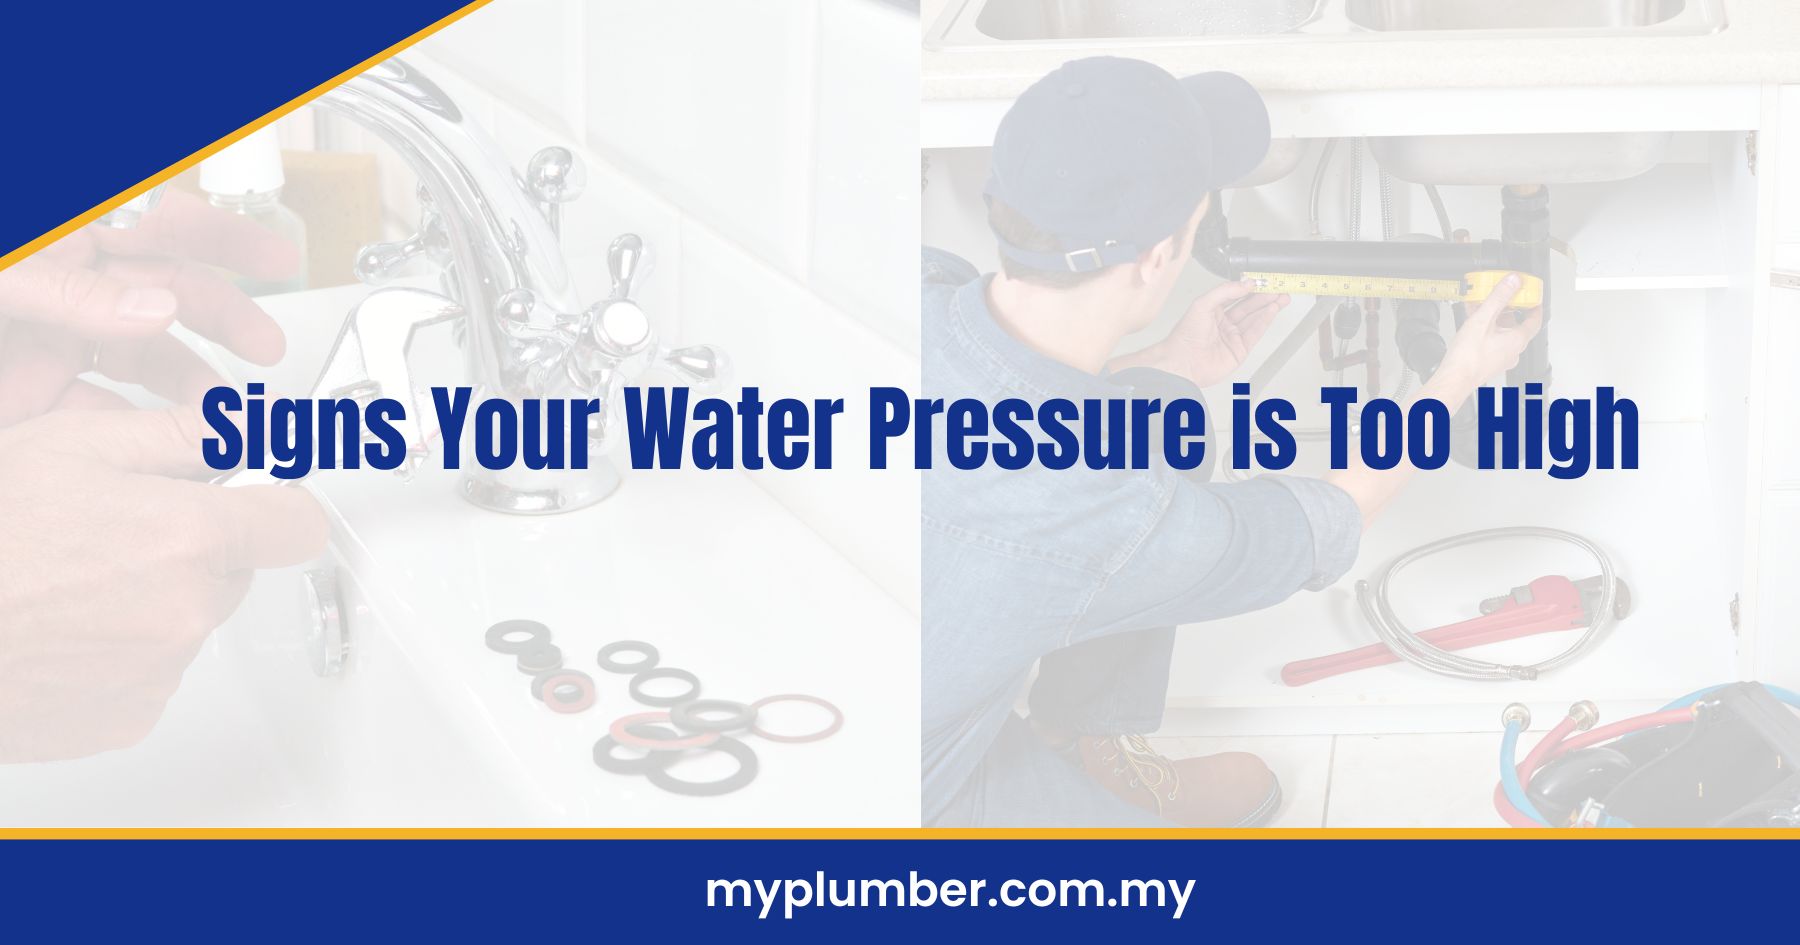 Signs Your Water Pressure is Too High